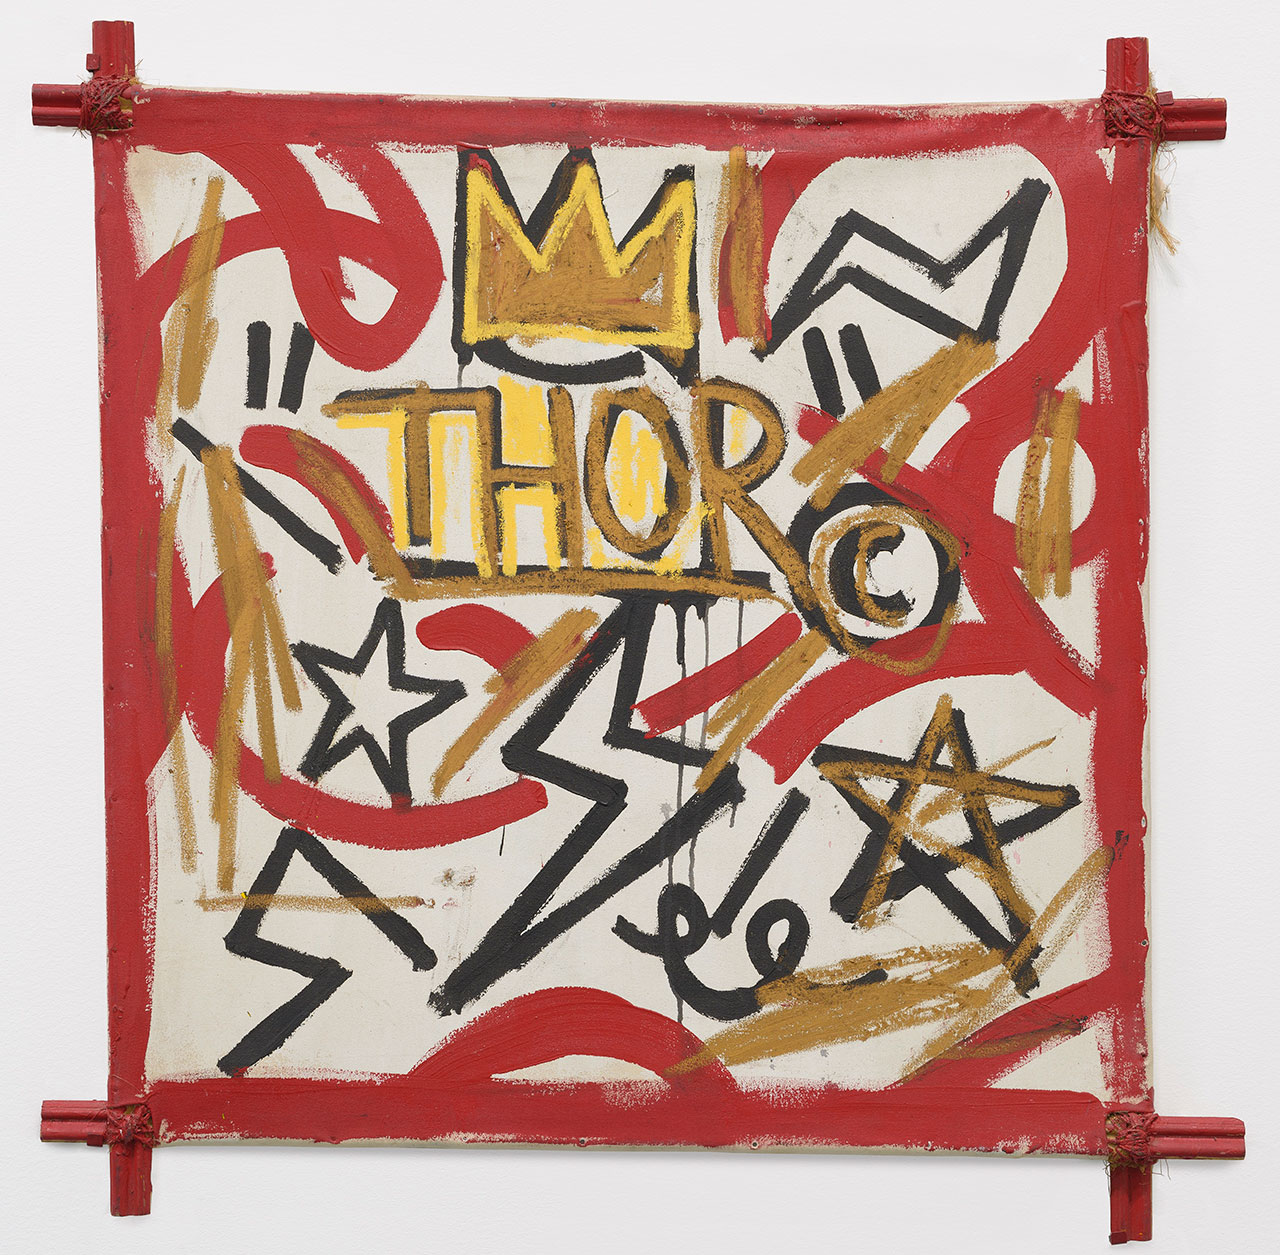 Untitled (Thor), 1982 © The Estate of Jean-Michel Basquiat Licensed by Artestar, New York